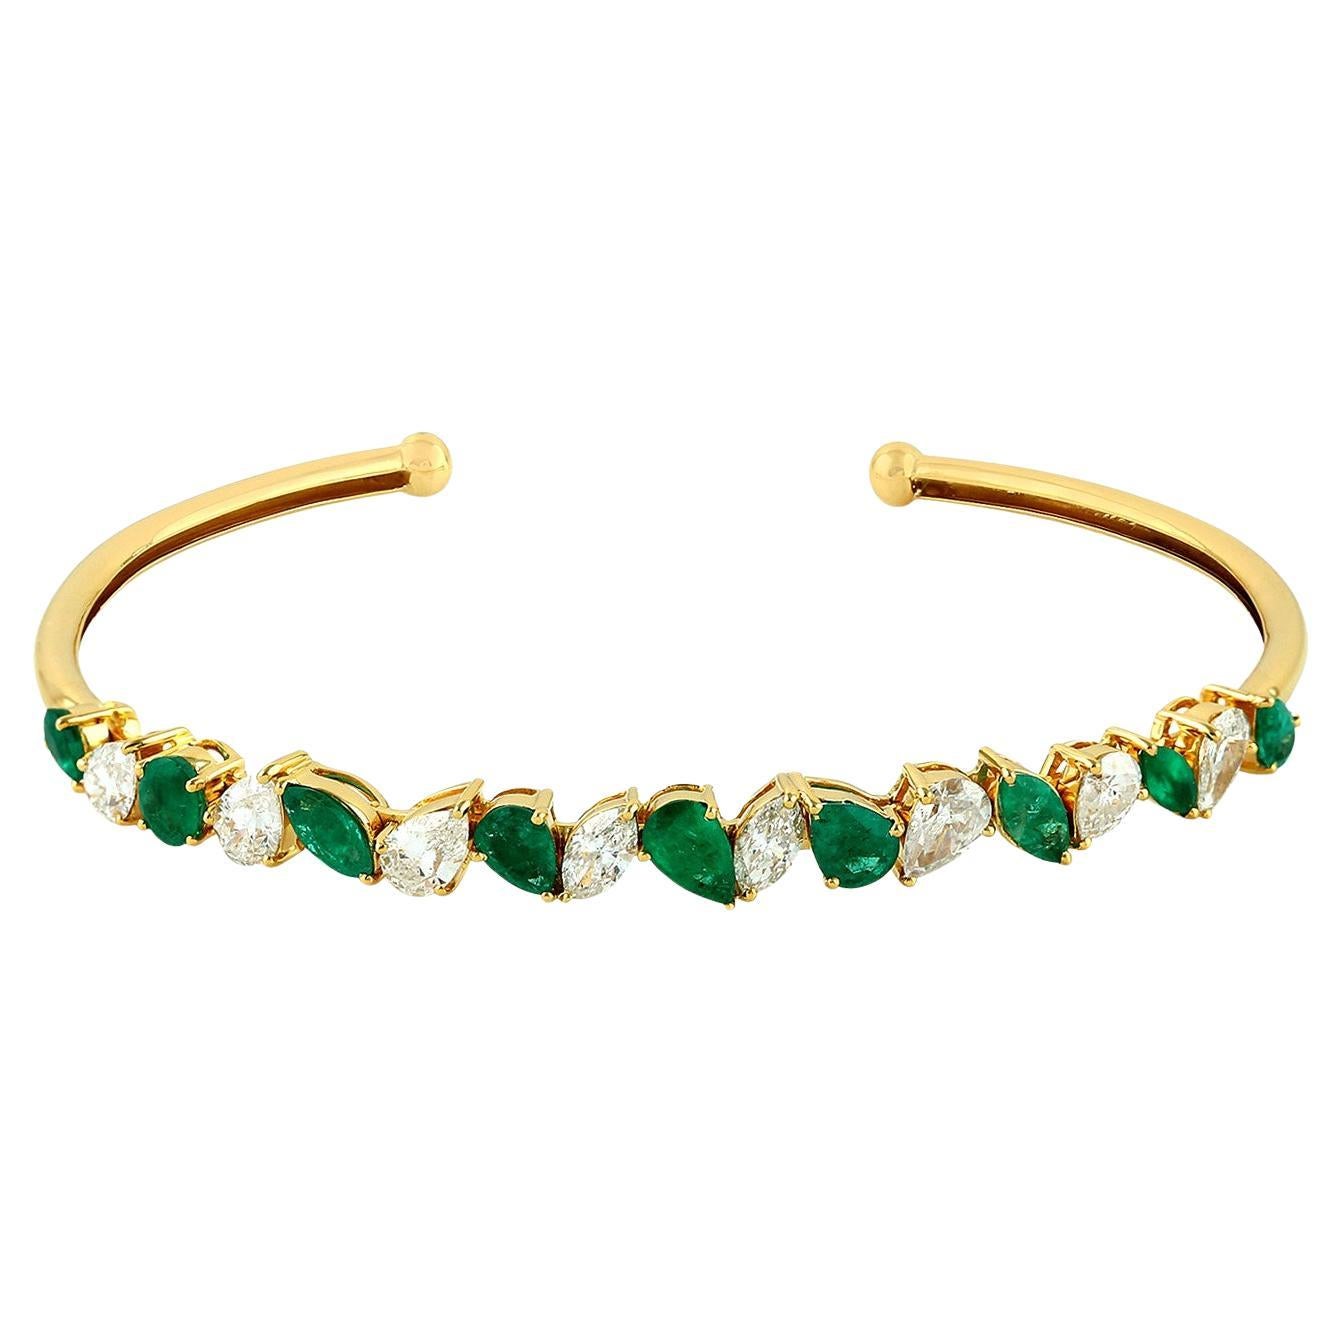 Marquise Shaped Emerald & Diamond Bangle Made In 18k Gold For Sale